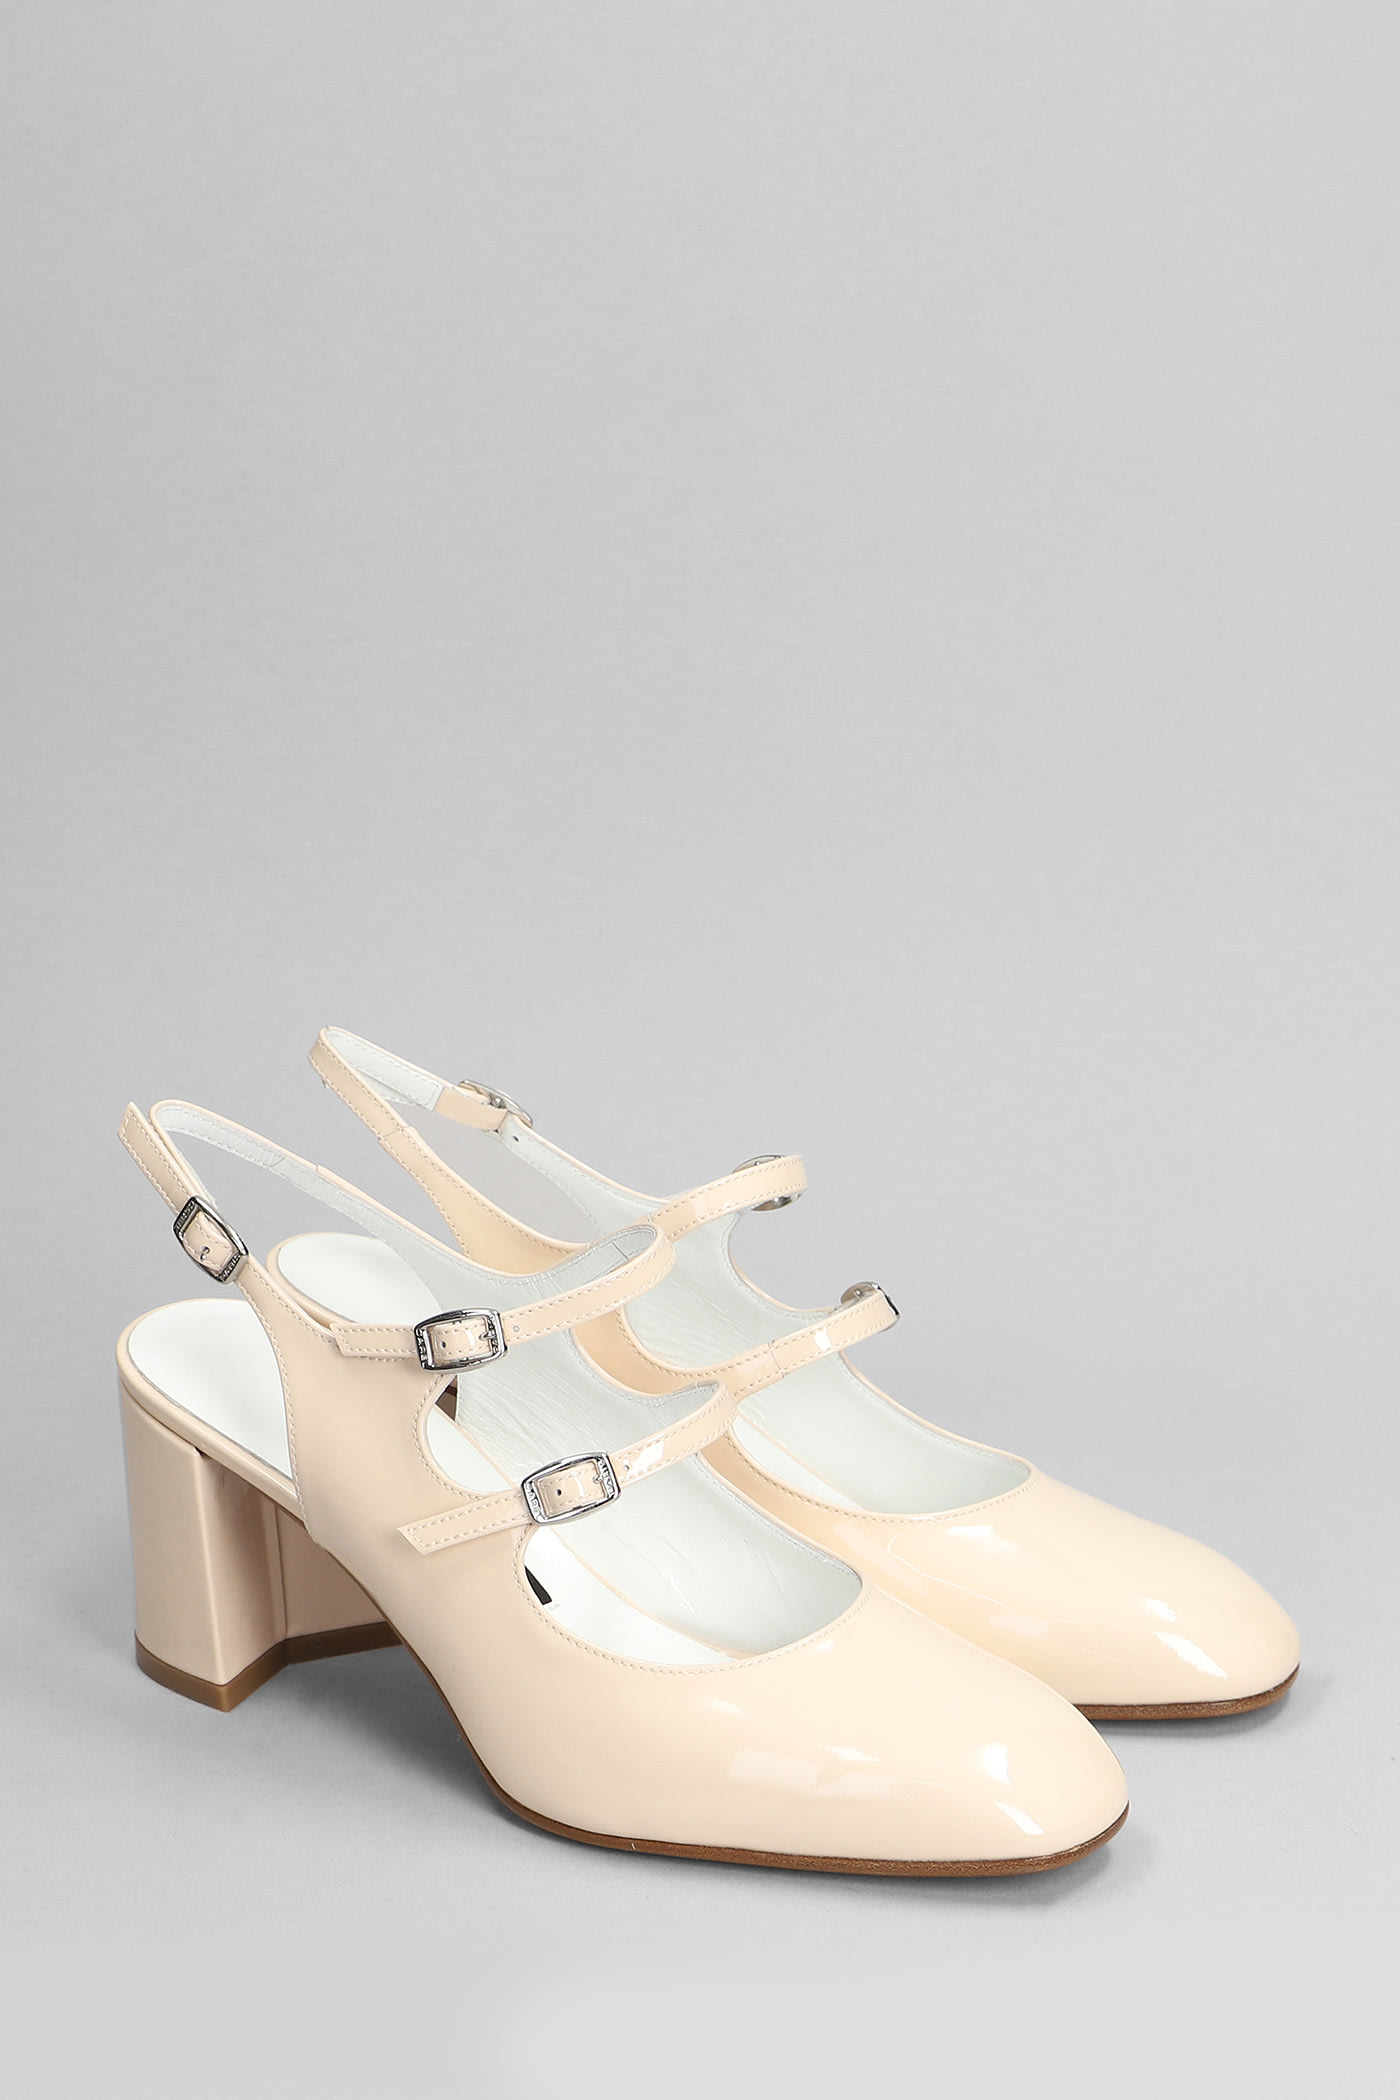 Shop Carel Banana Pumps In Beige Patent Leather